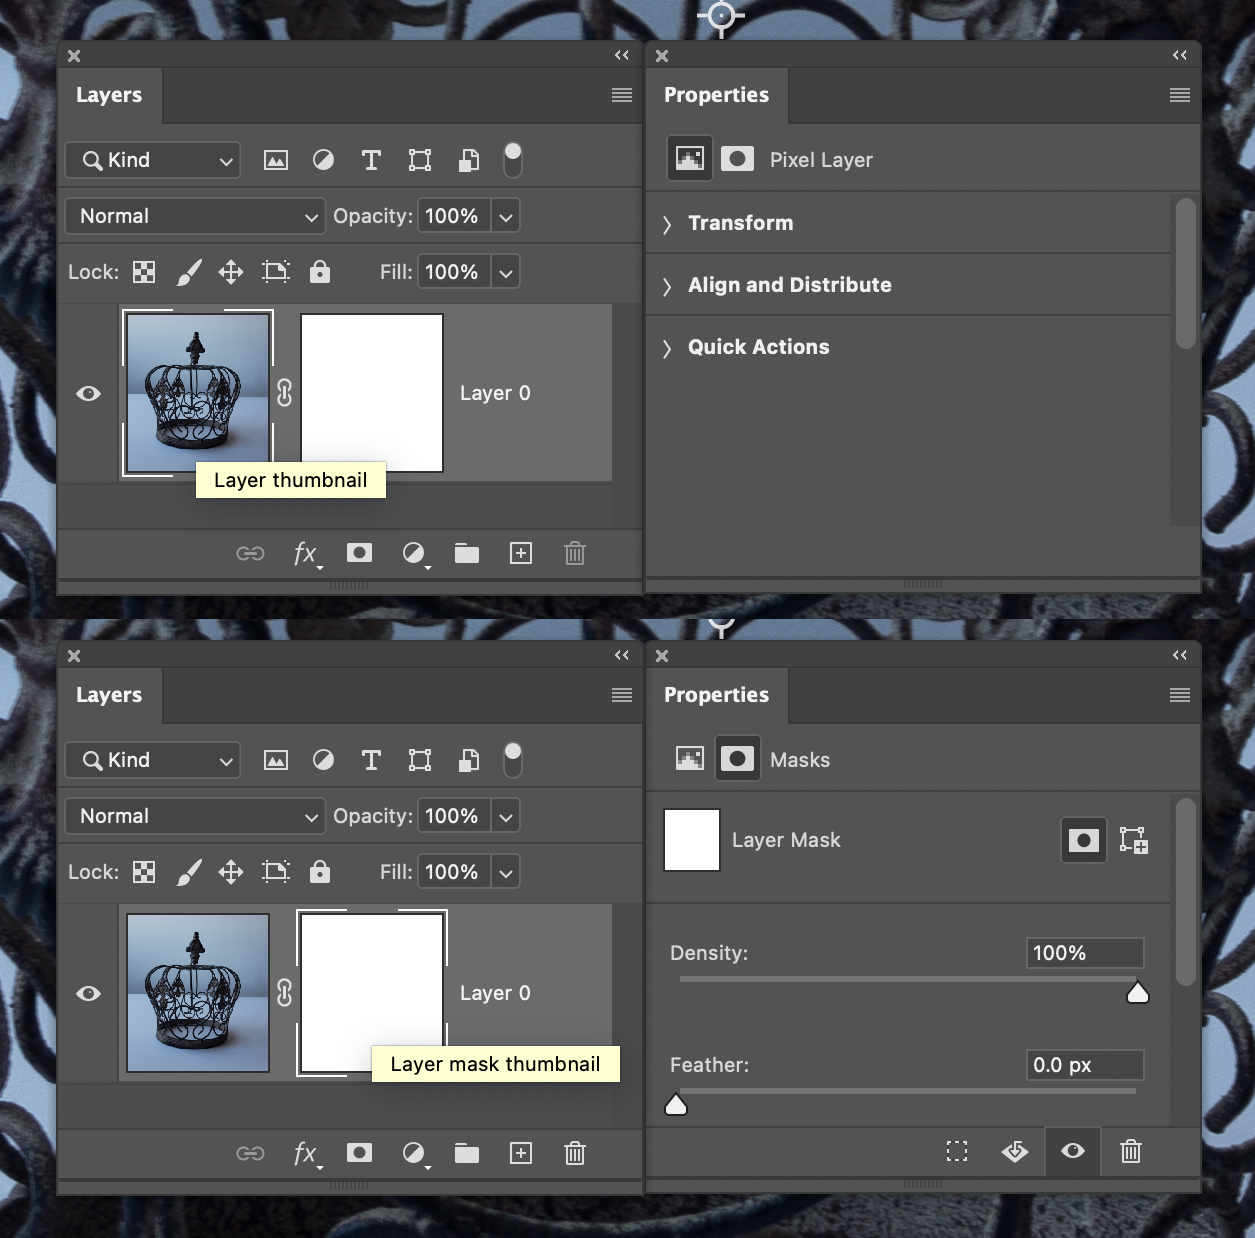 Layer and Layer Mask thumbnails.